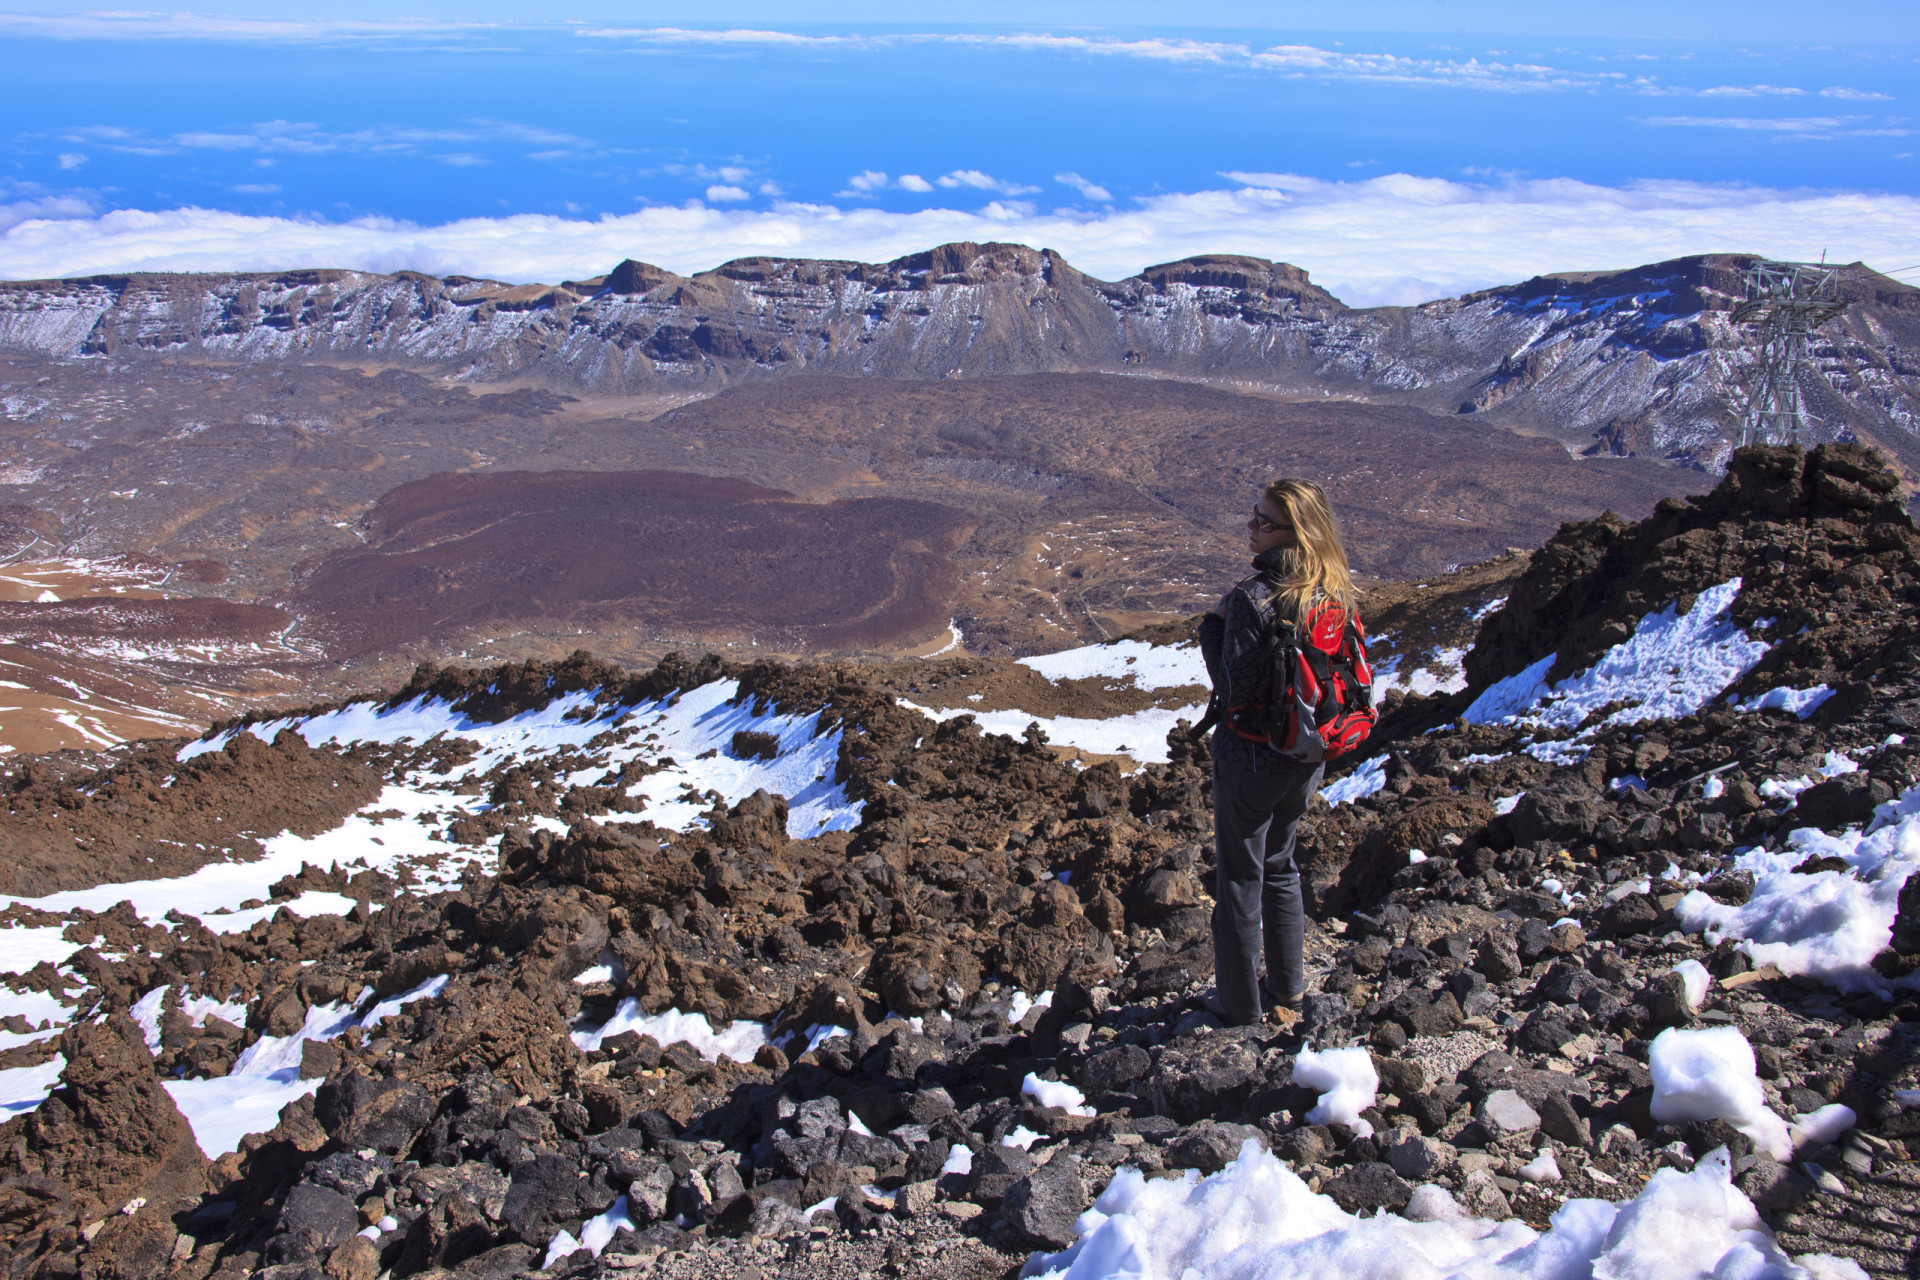 <p>Mount Teide, an active volcano on the Canary island of Tenerife, last erupted in November 1909. Summiting at 12,188 ft (3,715 m), Teide is the highest point in Spain and the highest point above sea level in the islands of the Atlantic.</p><p><a href="https://www.msn.com/en-us/community/channel/vid-7xx8mnucu55yw63we9va2gwr7uihbxwc68fxqp25x6tg4ftibpra?cvid=94631541bc0f4f89bfd59158d696ad7e">Follow us and access great exclusive content every day</a></p>